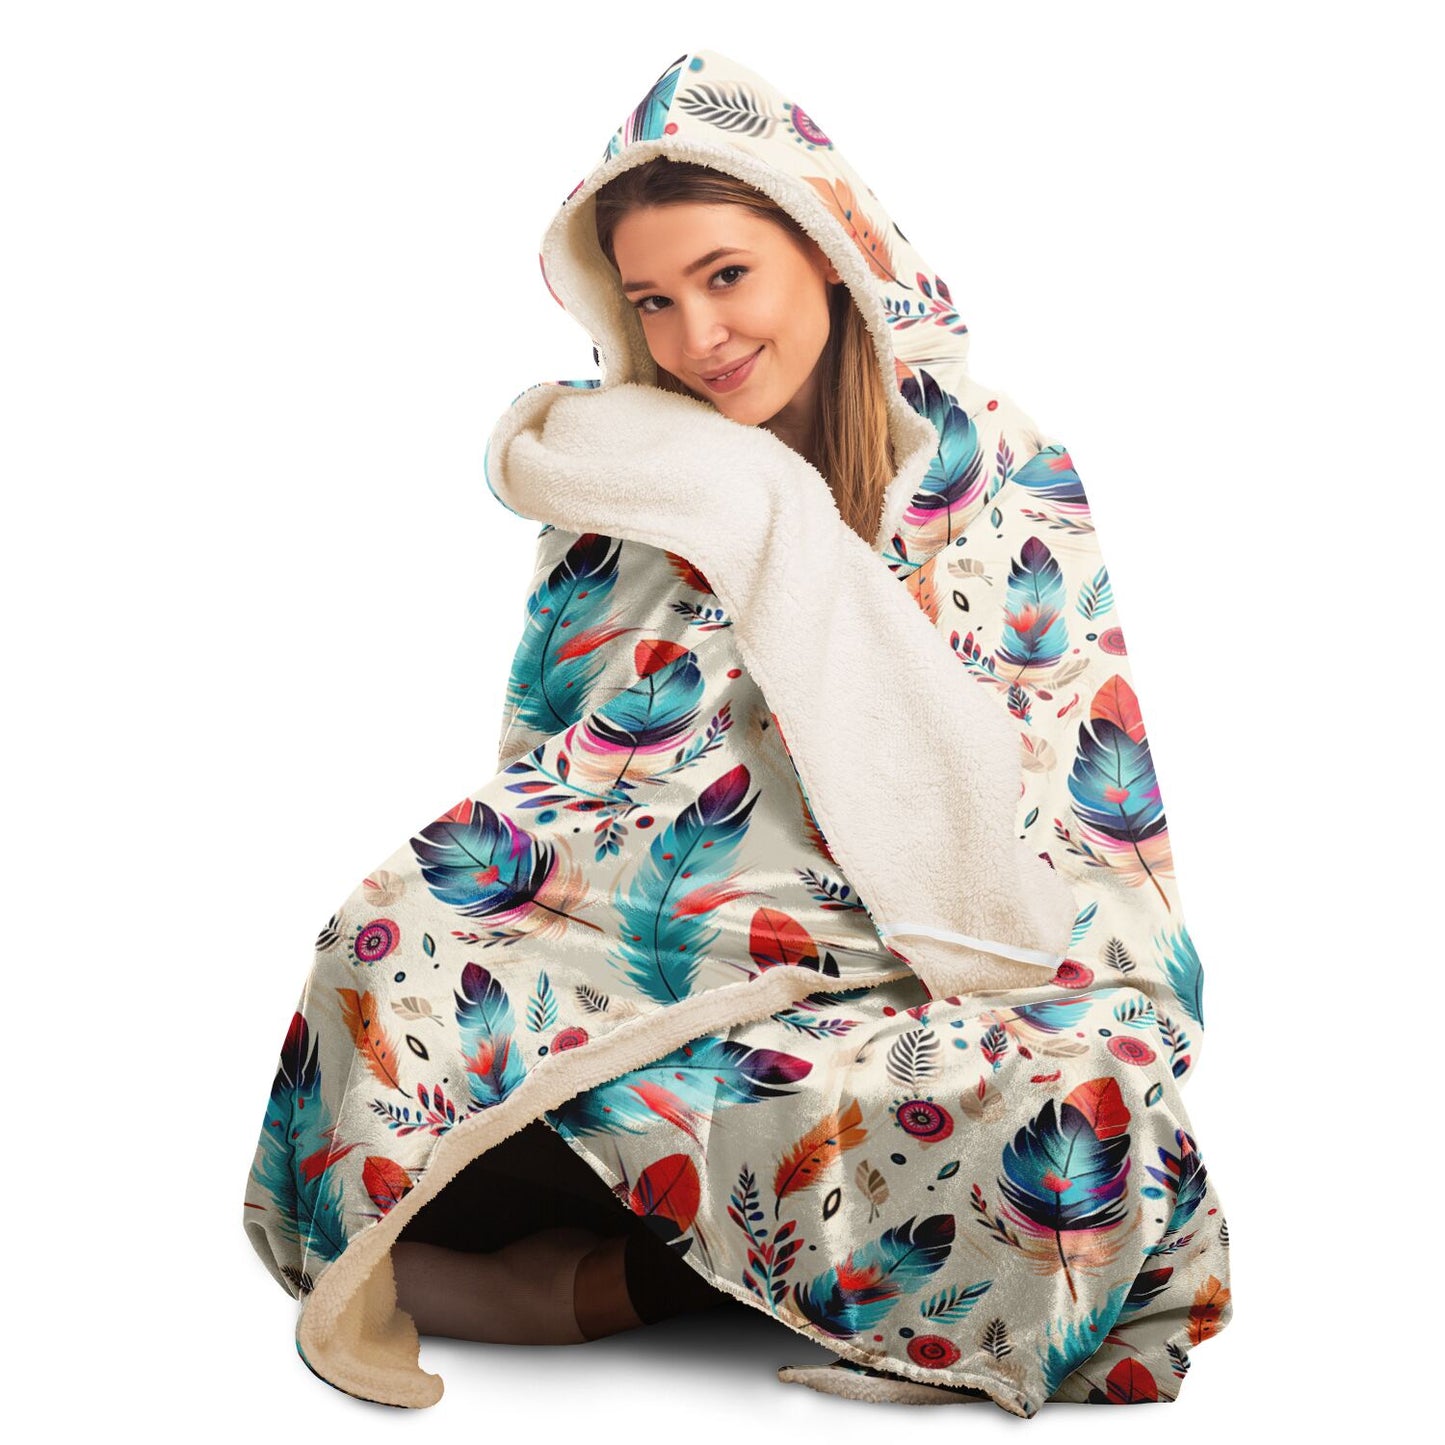 Native American Indian Feather Design Hooded Blanket - All Over Print - Southwest Boho